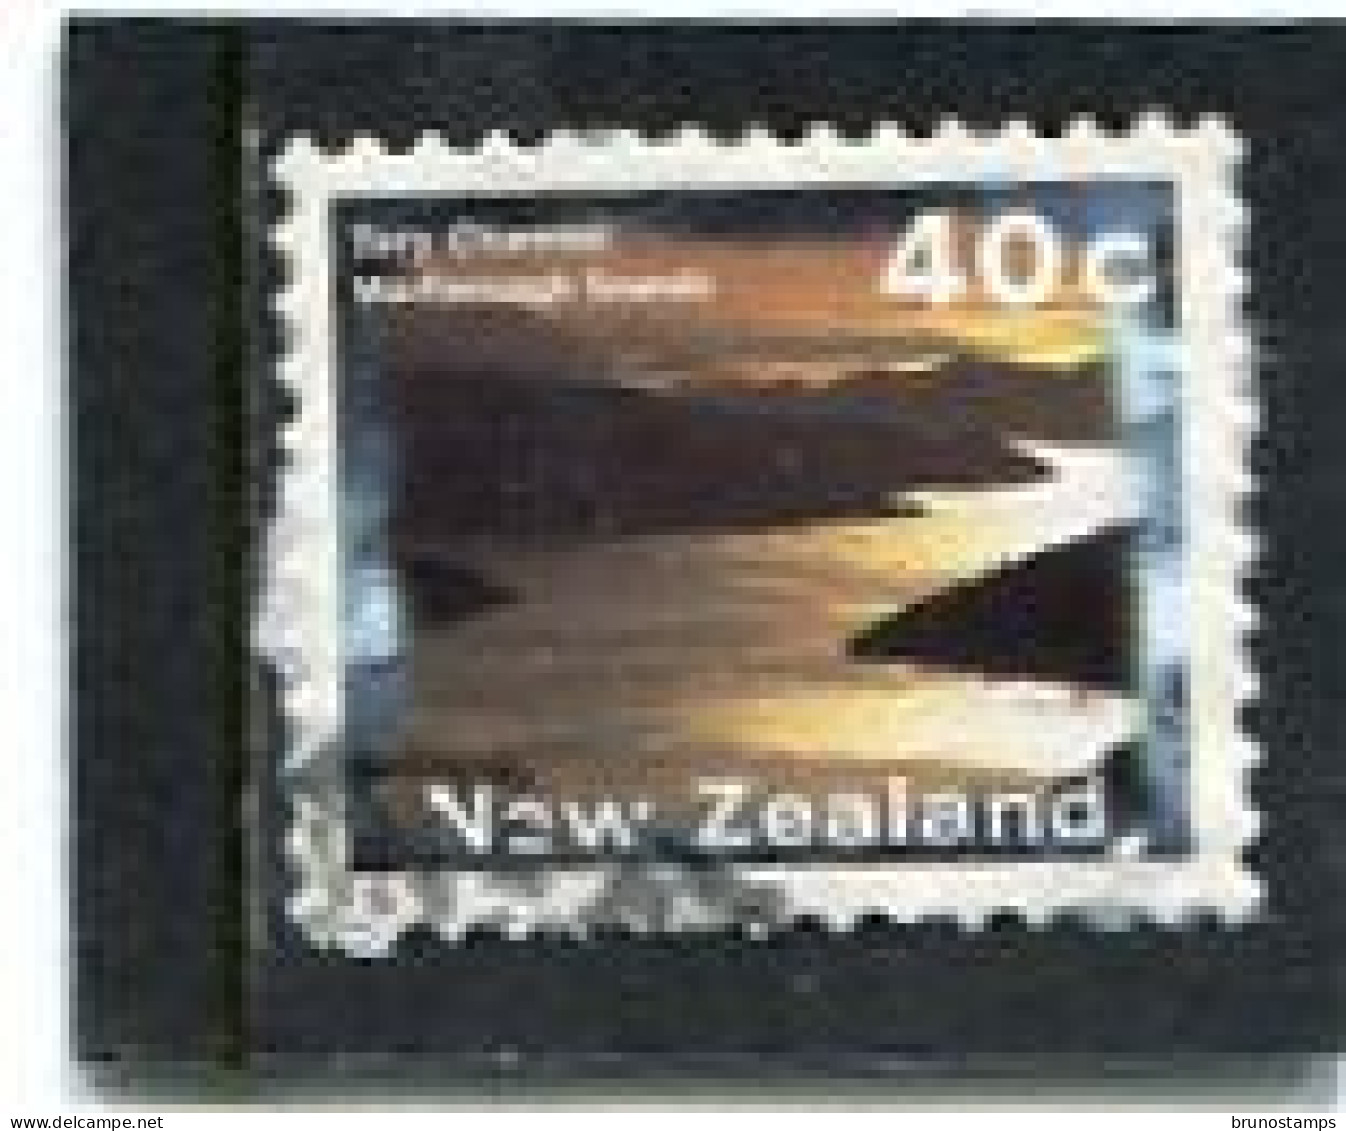 NEW ZEALAND - 2004  40c  TORY CHANNEL  SELF ADHESIVE  FINE  USED - Gebraucht